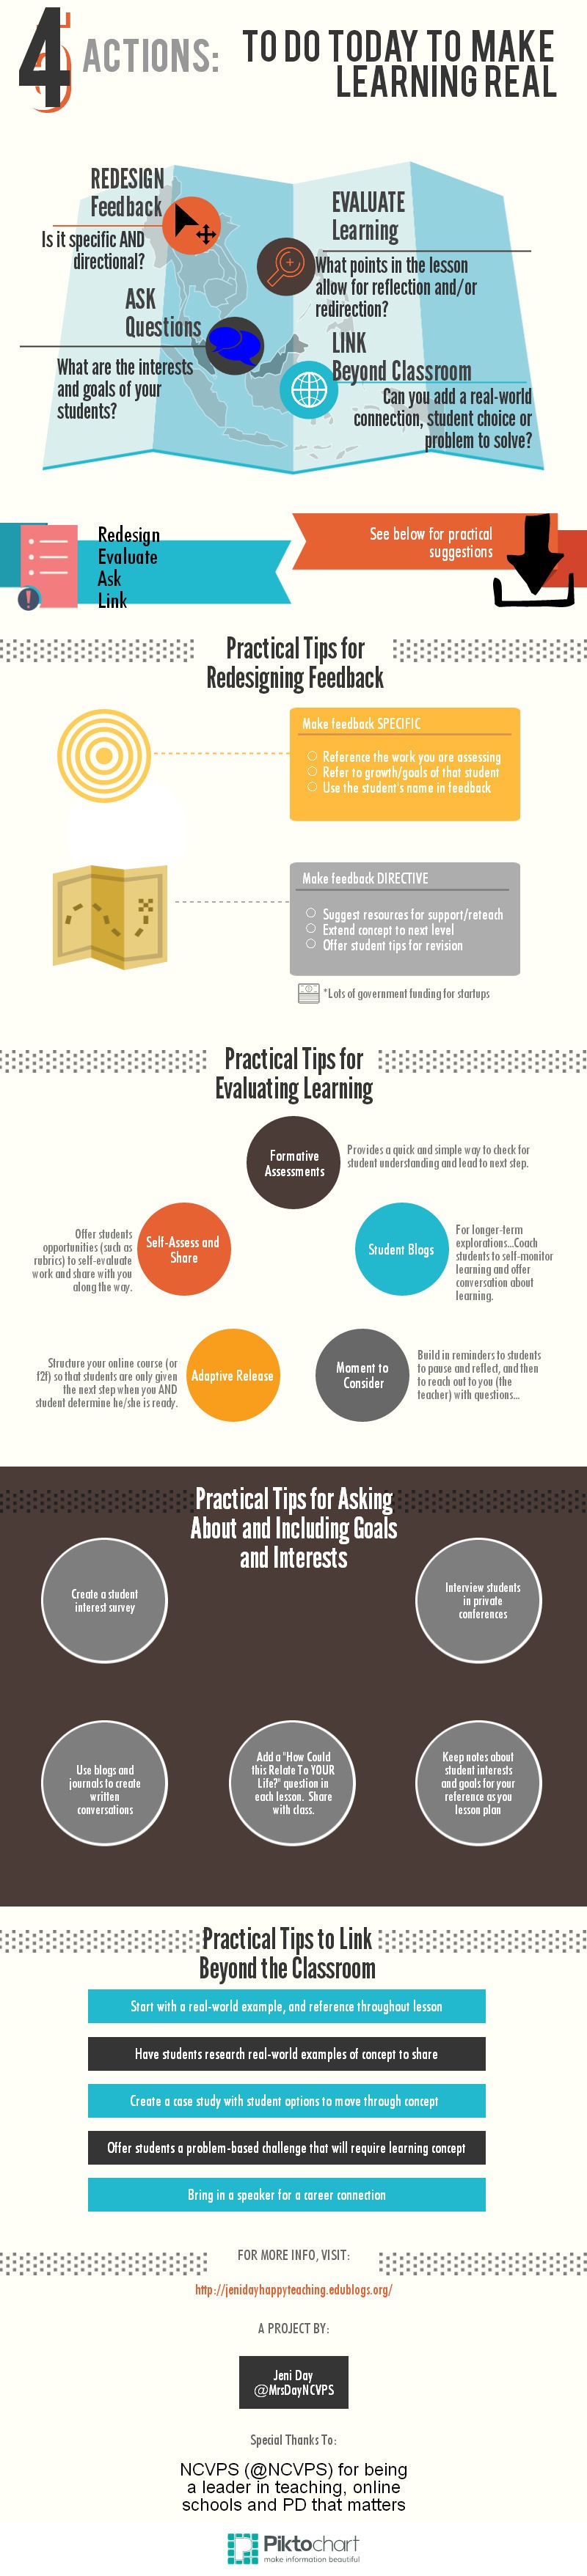 4 Steps to Real Learning Infographic